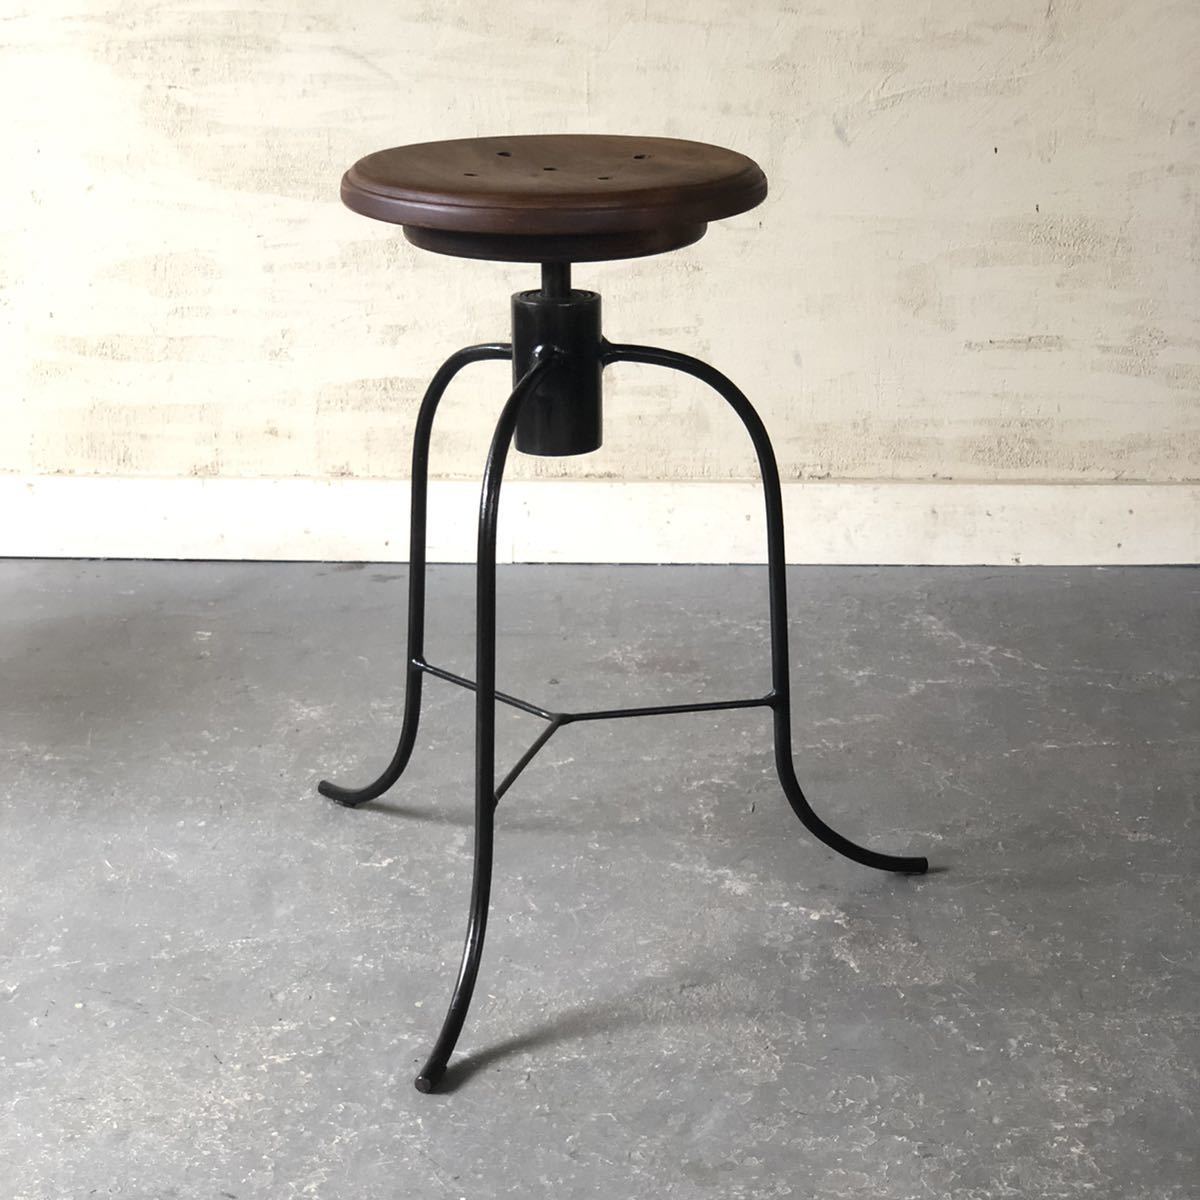 * cheeks material. circle stool rotation chair iron legs circle chair circle stool drum s loan store furniture retro Cafe store furniture stock equipped ftg